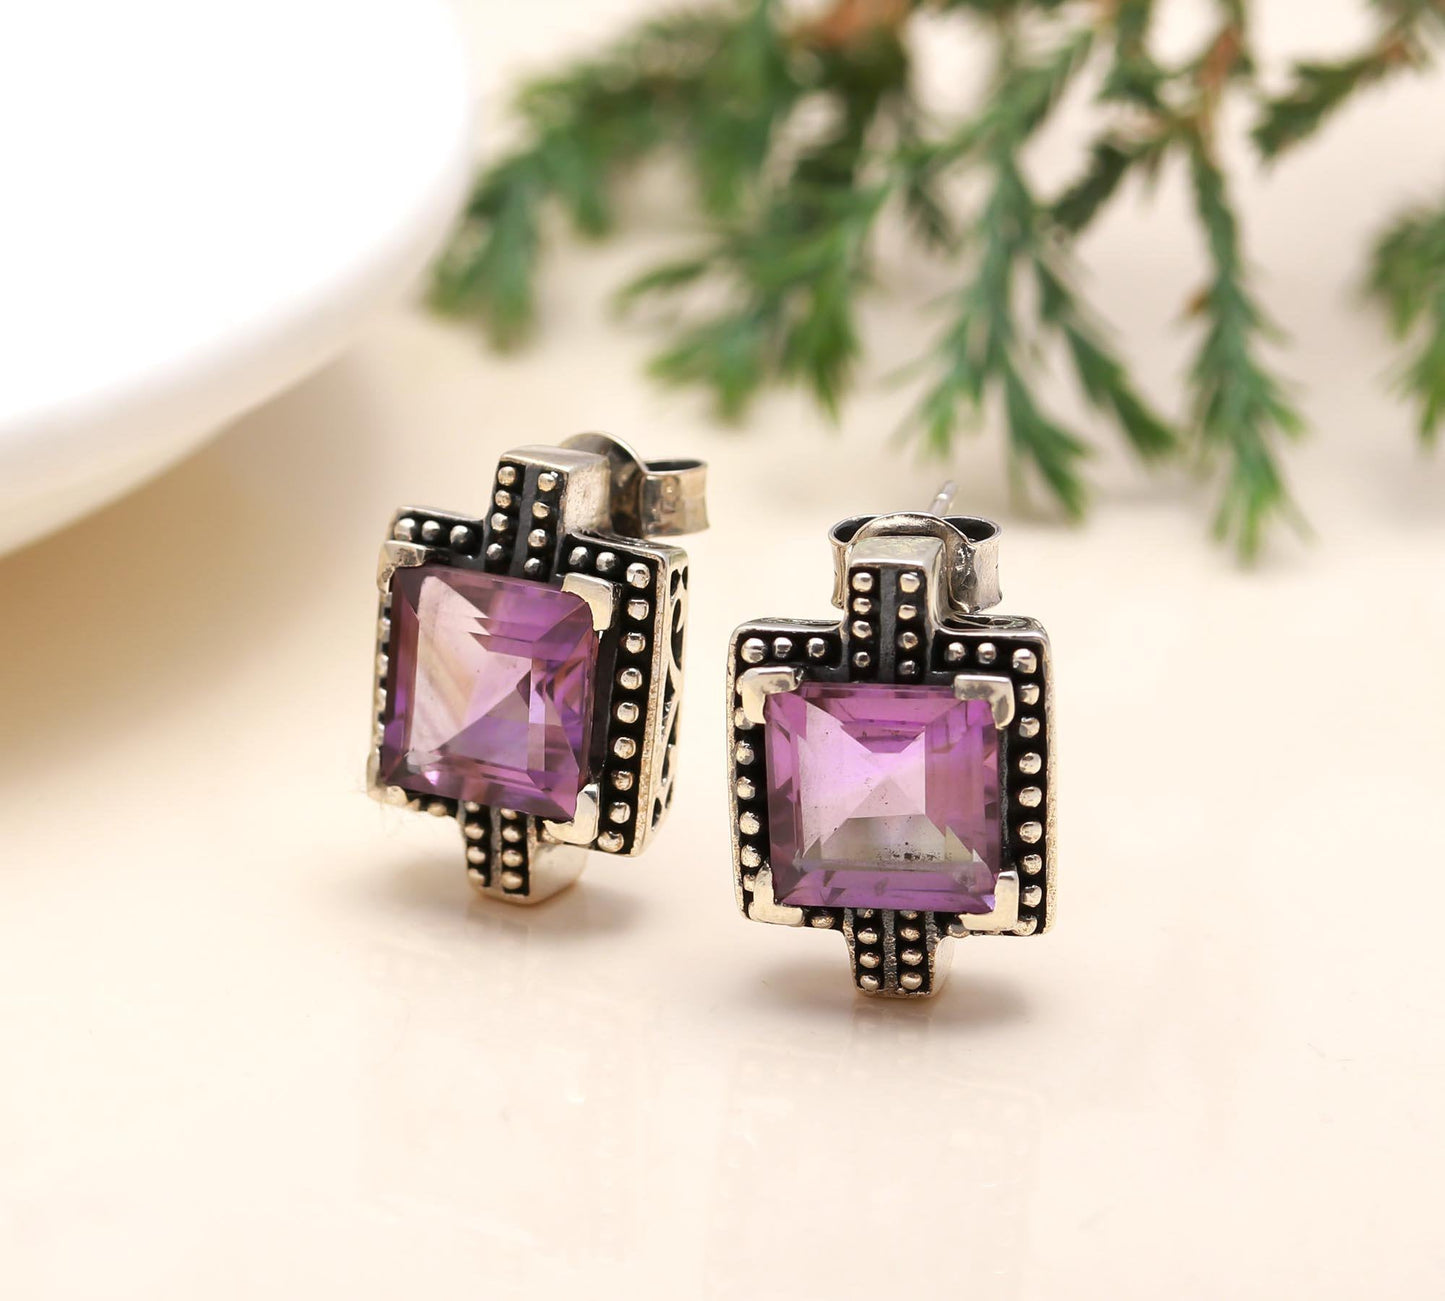 Solid 925 Sterling Silver Faceted Amethyst Stud Earrings in Square Shape, Handmade, Gift for Her / Birthday / Anniversary/Oxodised / Antique